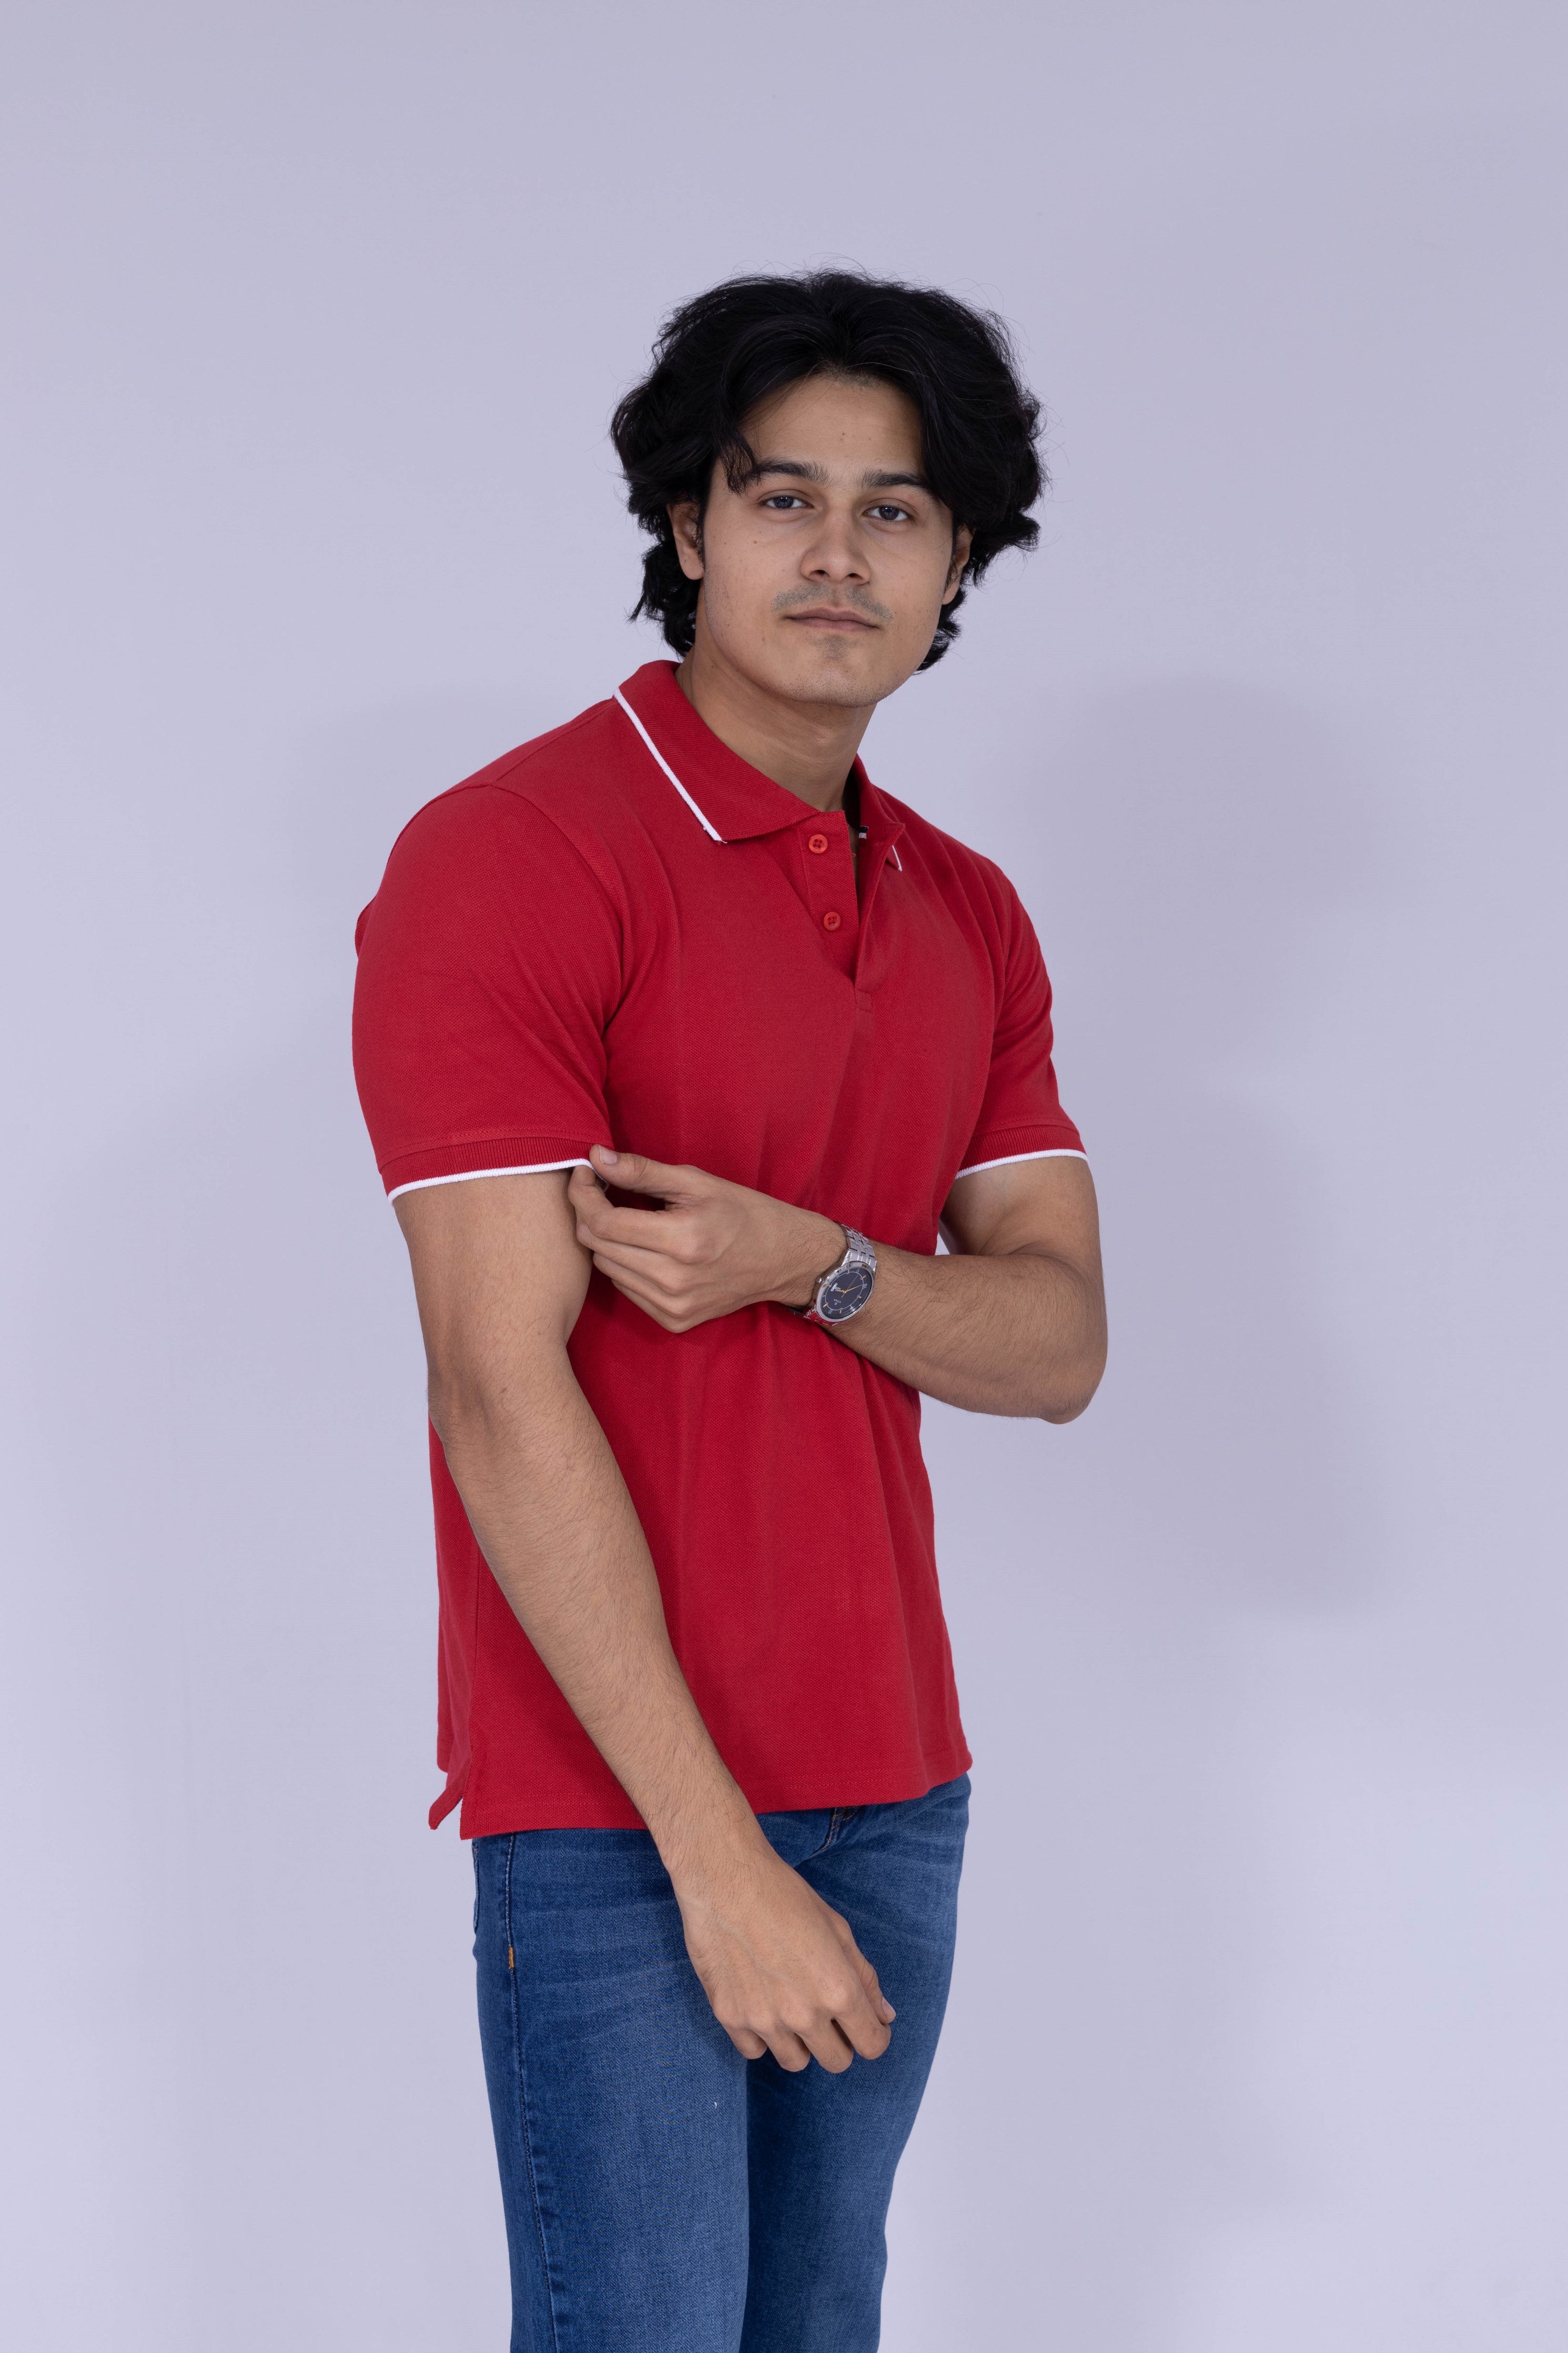 Red polo T-shirt with white tipping details